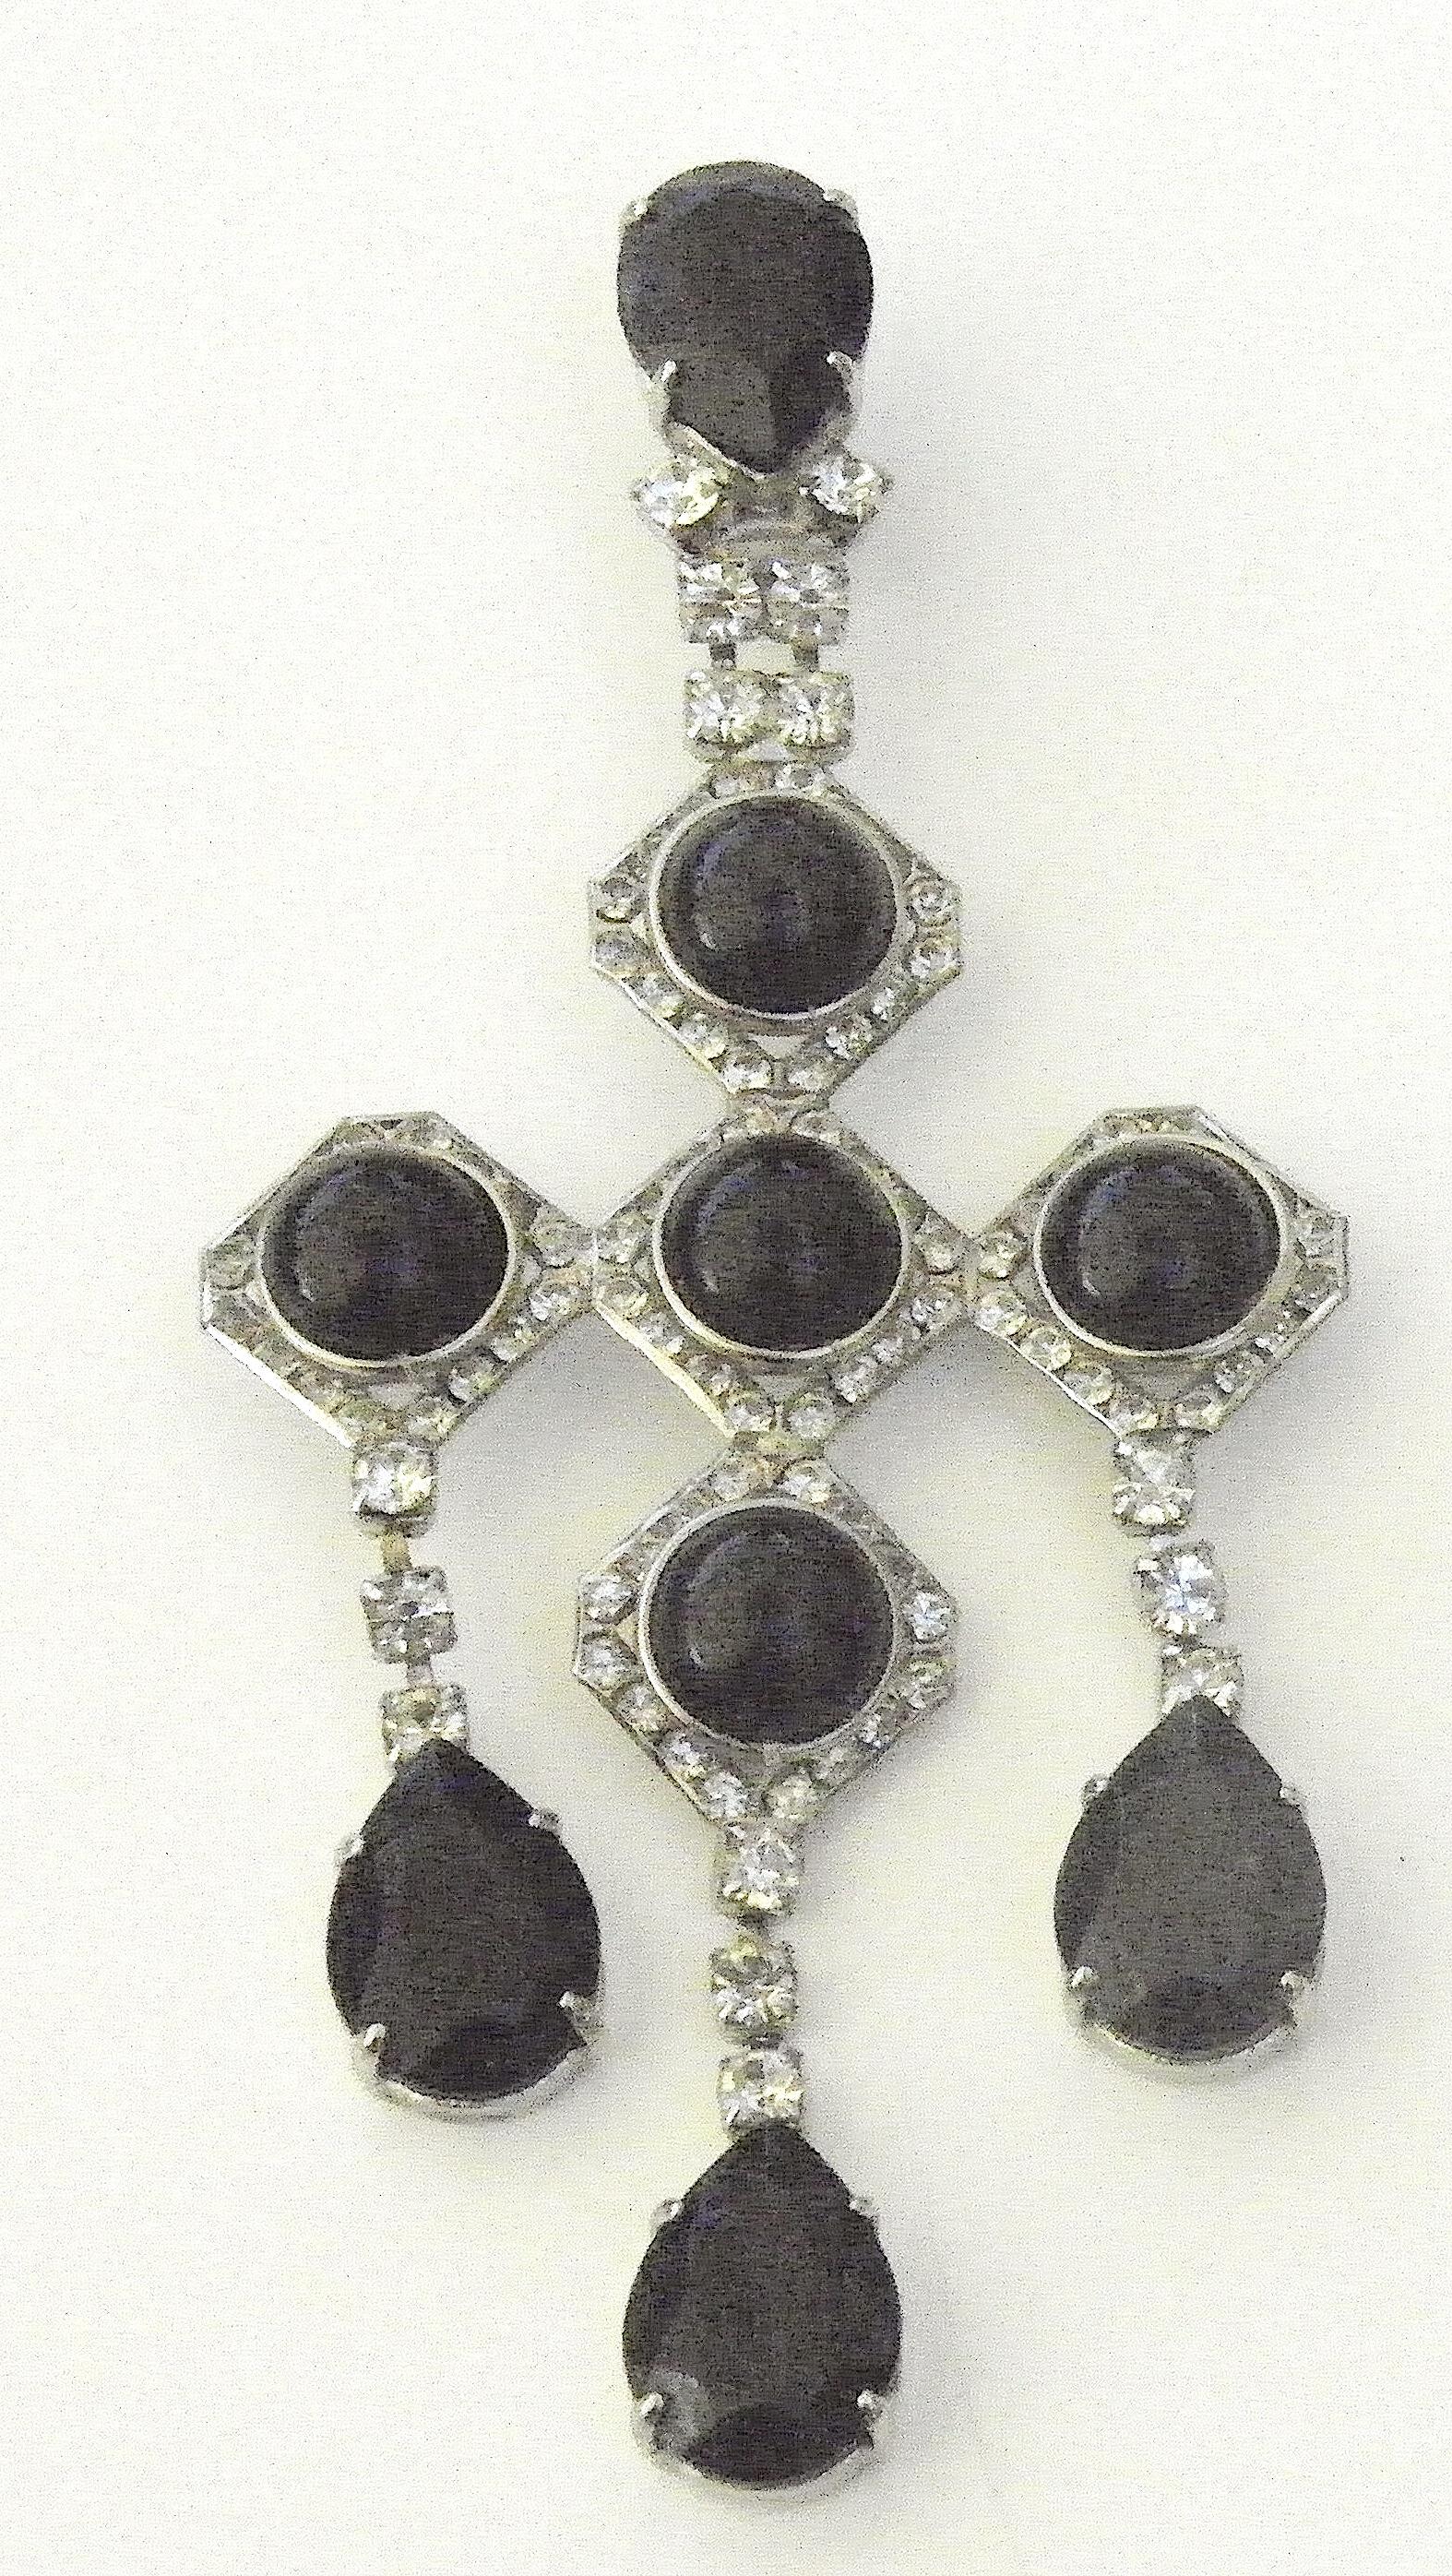 Gorgeous 1930-40s Large Impressive Haute Couture 4 3/4 in. Drop Runway Earrings-sterling silver, Onyx black stones, and diamente trimmed chandelier clip on earrings, formerly belonging to Rebecca Harkness- the society heiress to standard oil who